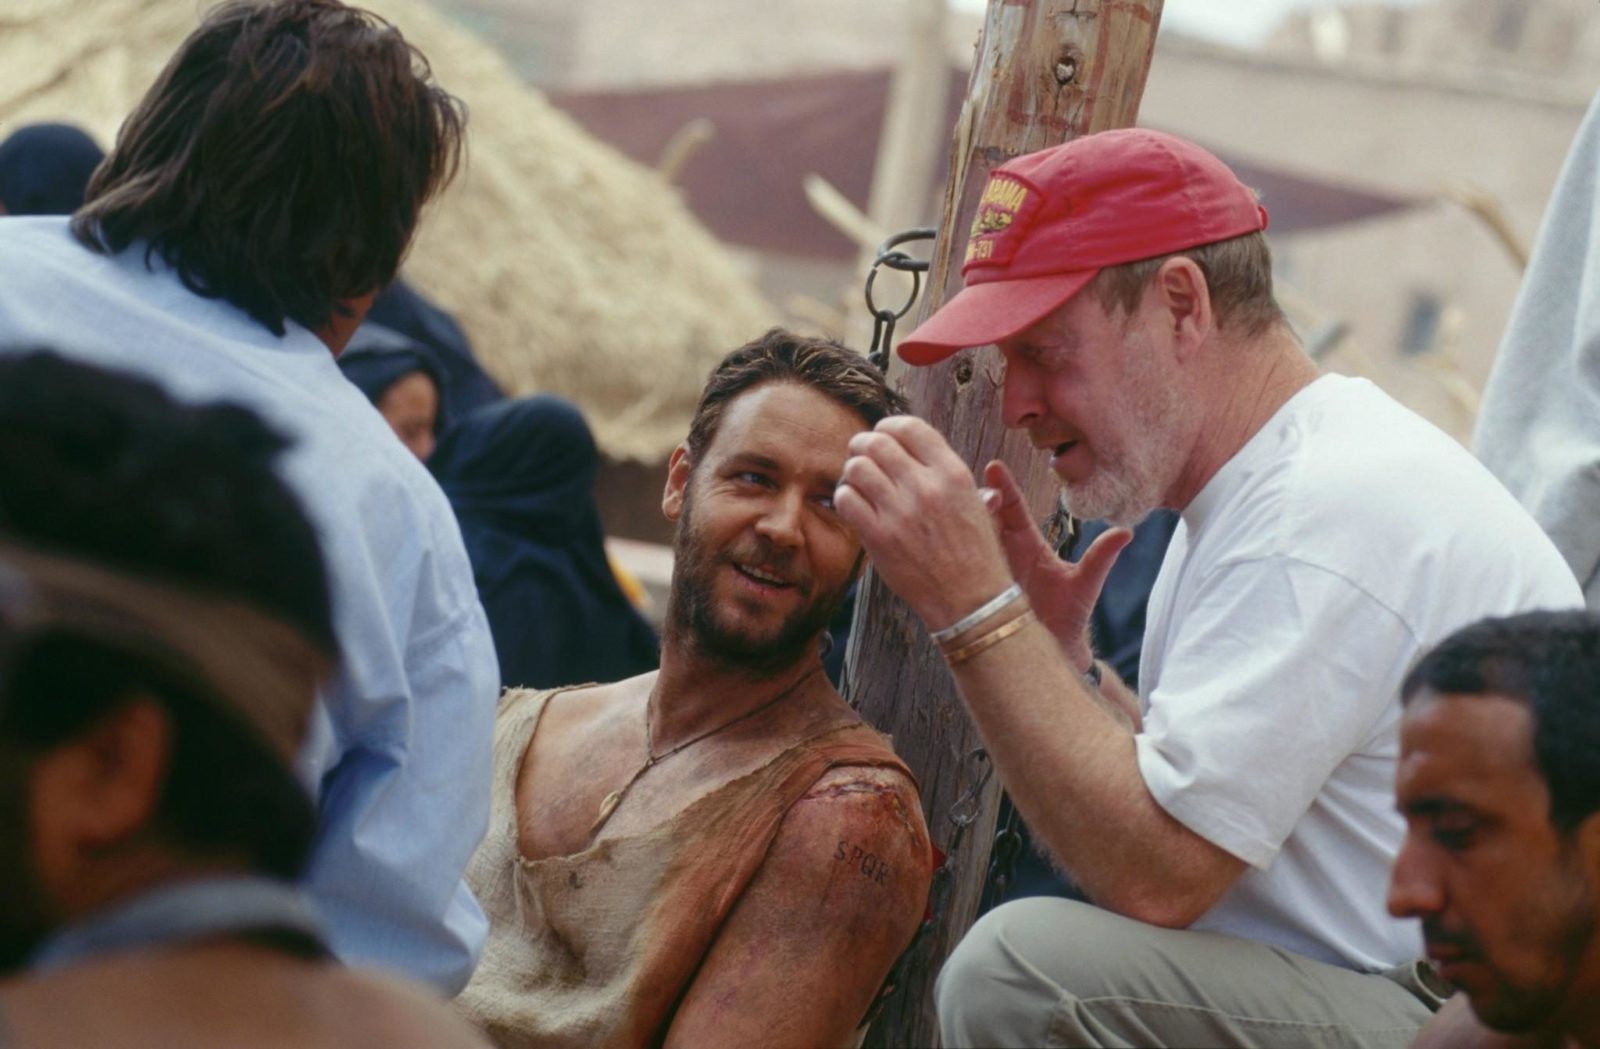 Russel Crowe and Ridley Scott on the set of Gladiator